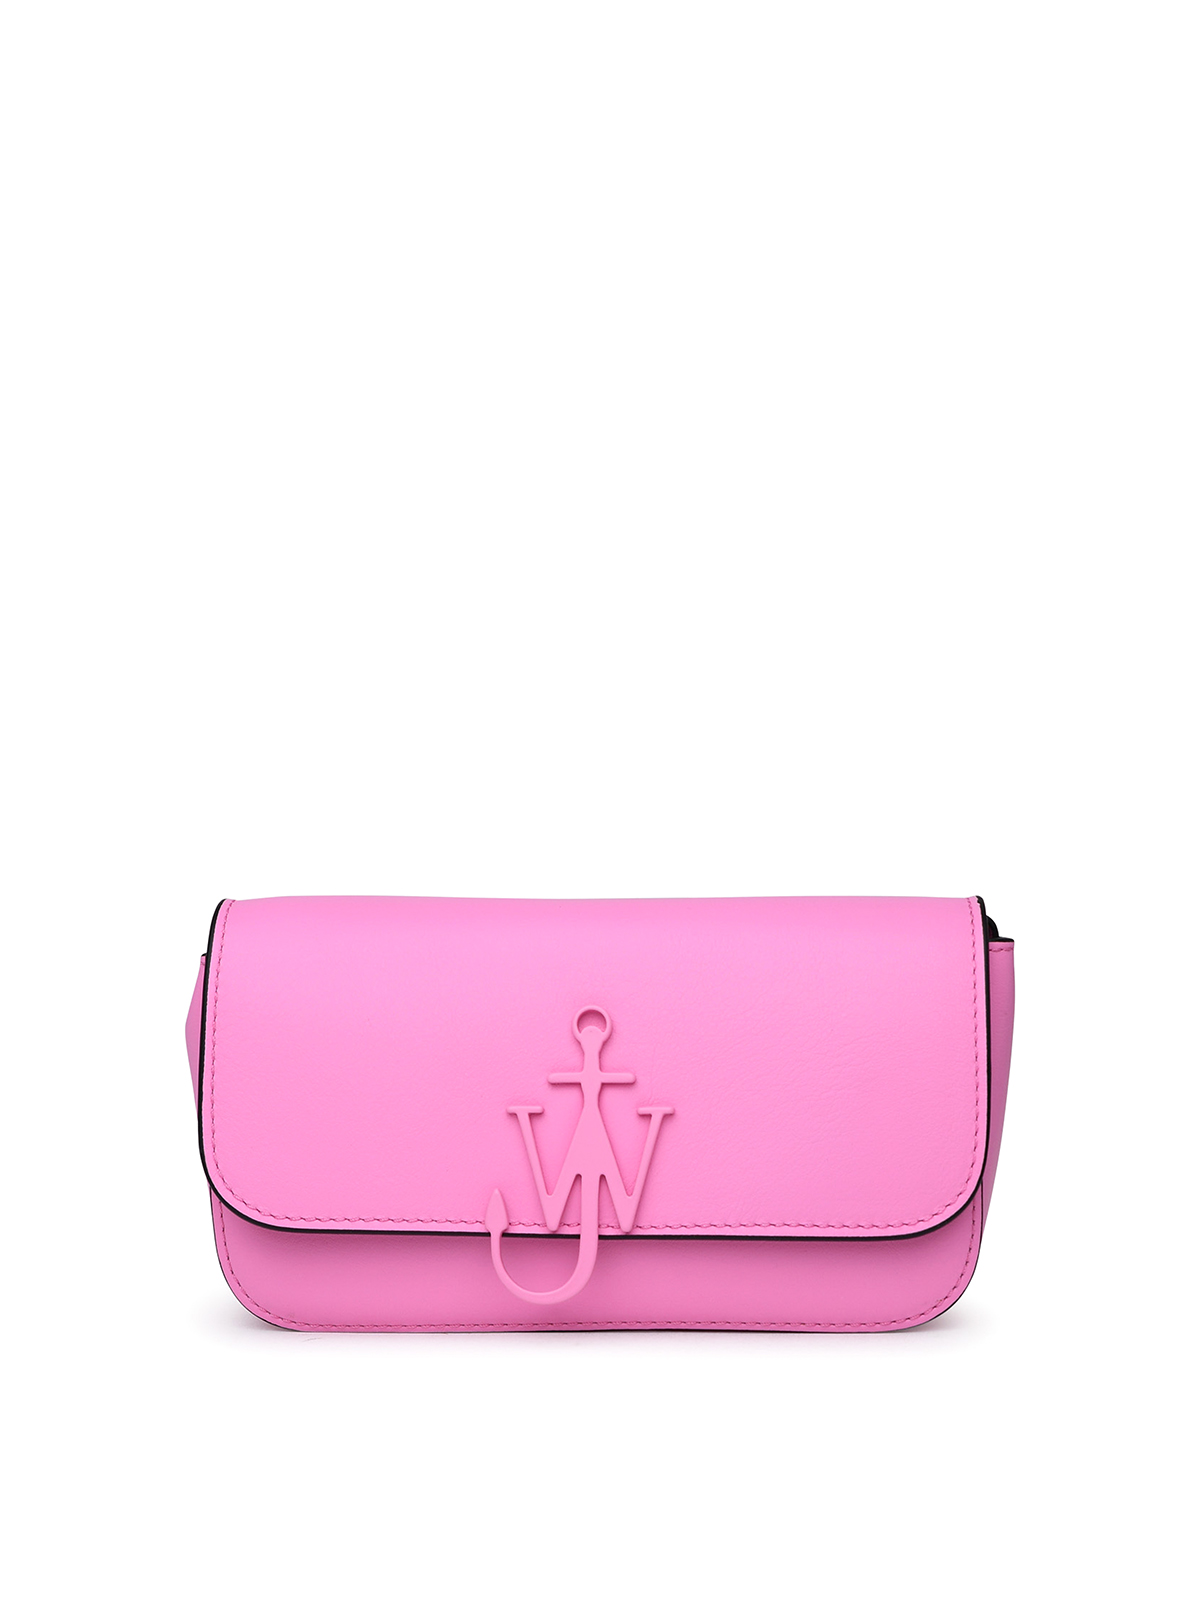 Jw Anderson Anchor Bag In Pink Leather In Nude & Neutrals